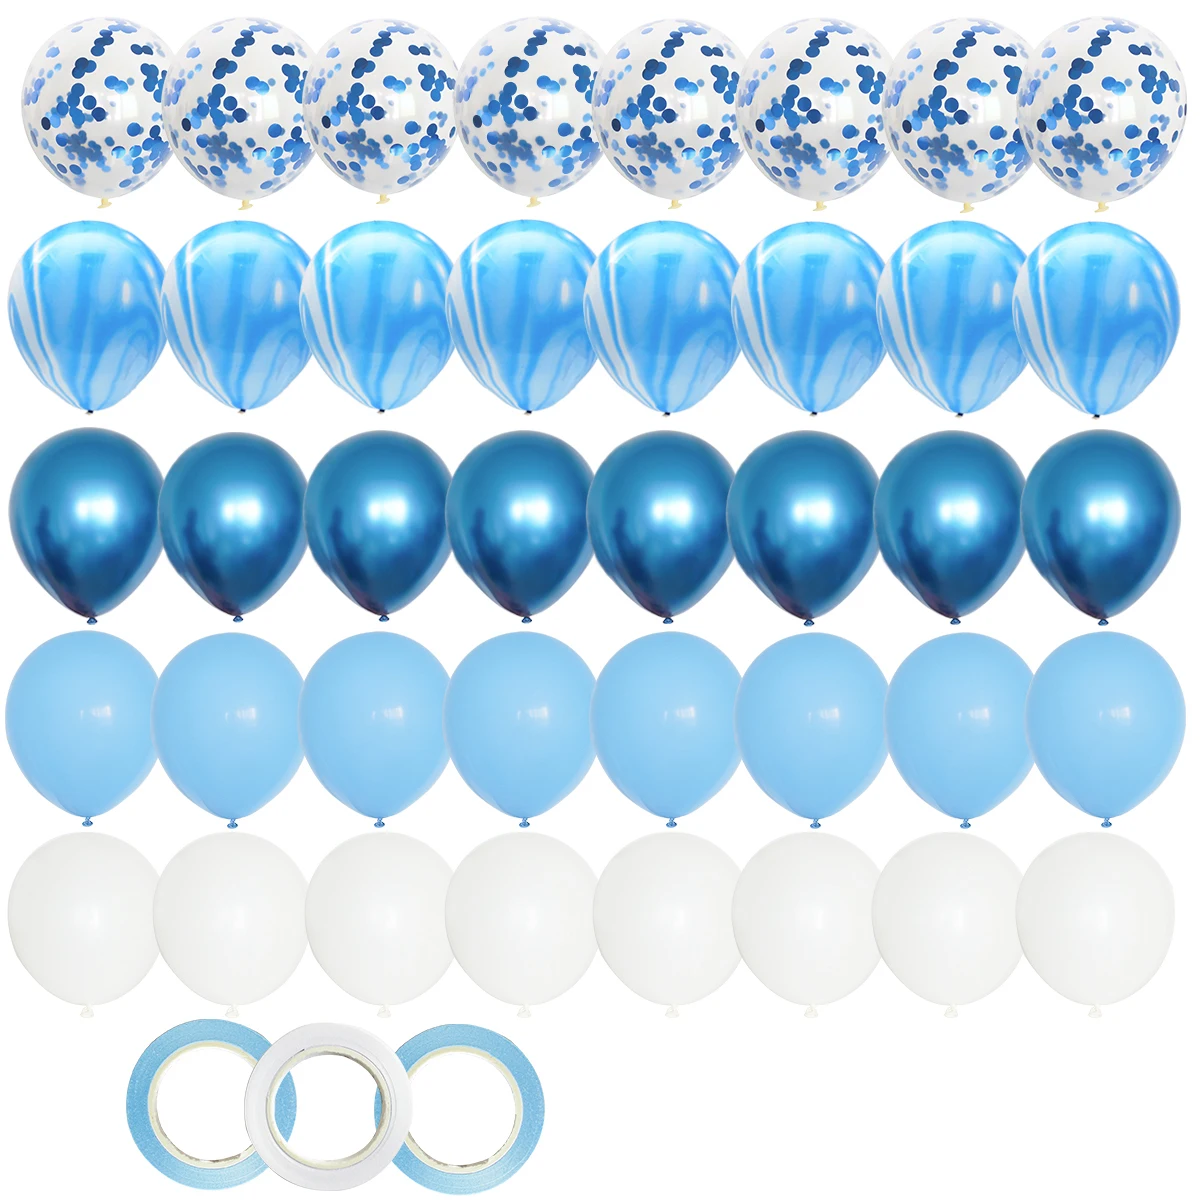 

40pcs/Set 12inch Blue Latex Confetti Balloons Its a Boy Girl Baby Shower Gender Reveal Birthday Party DIY Decoration Babyshower